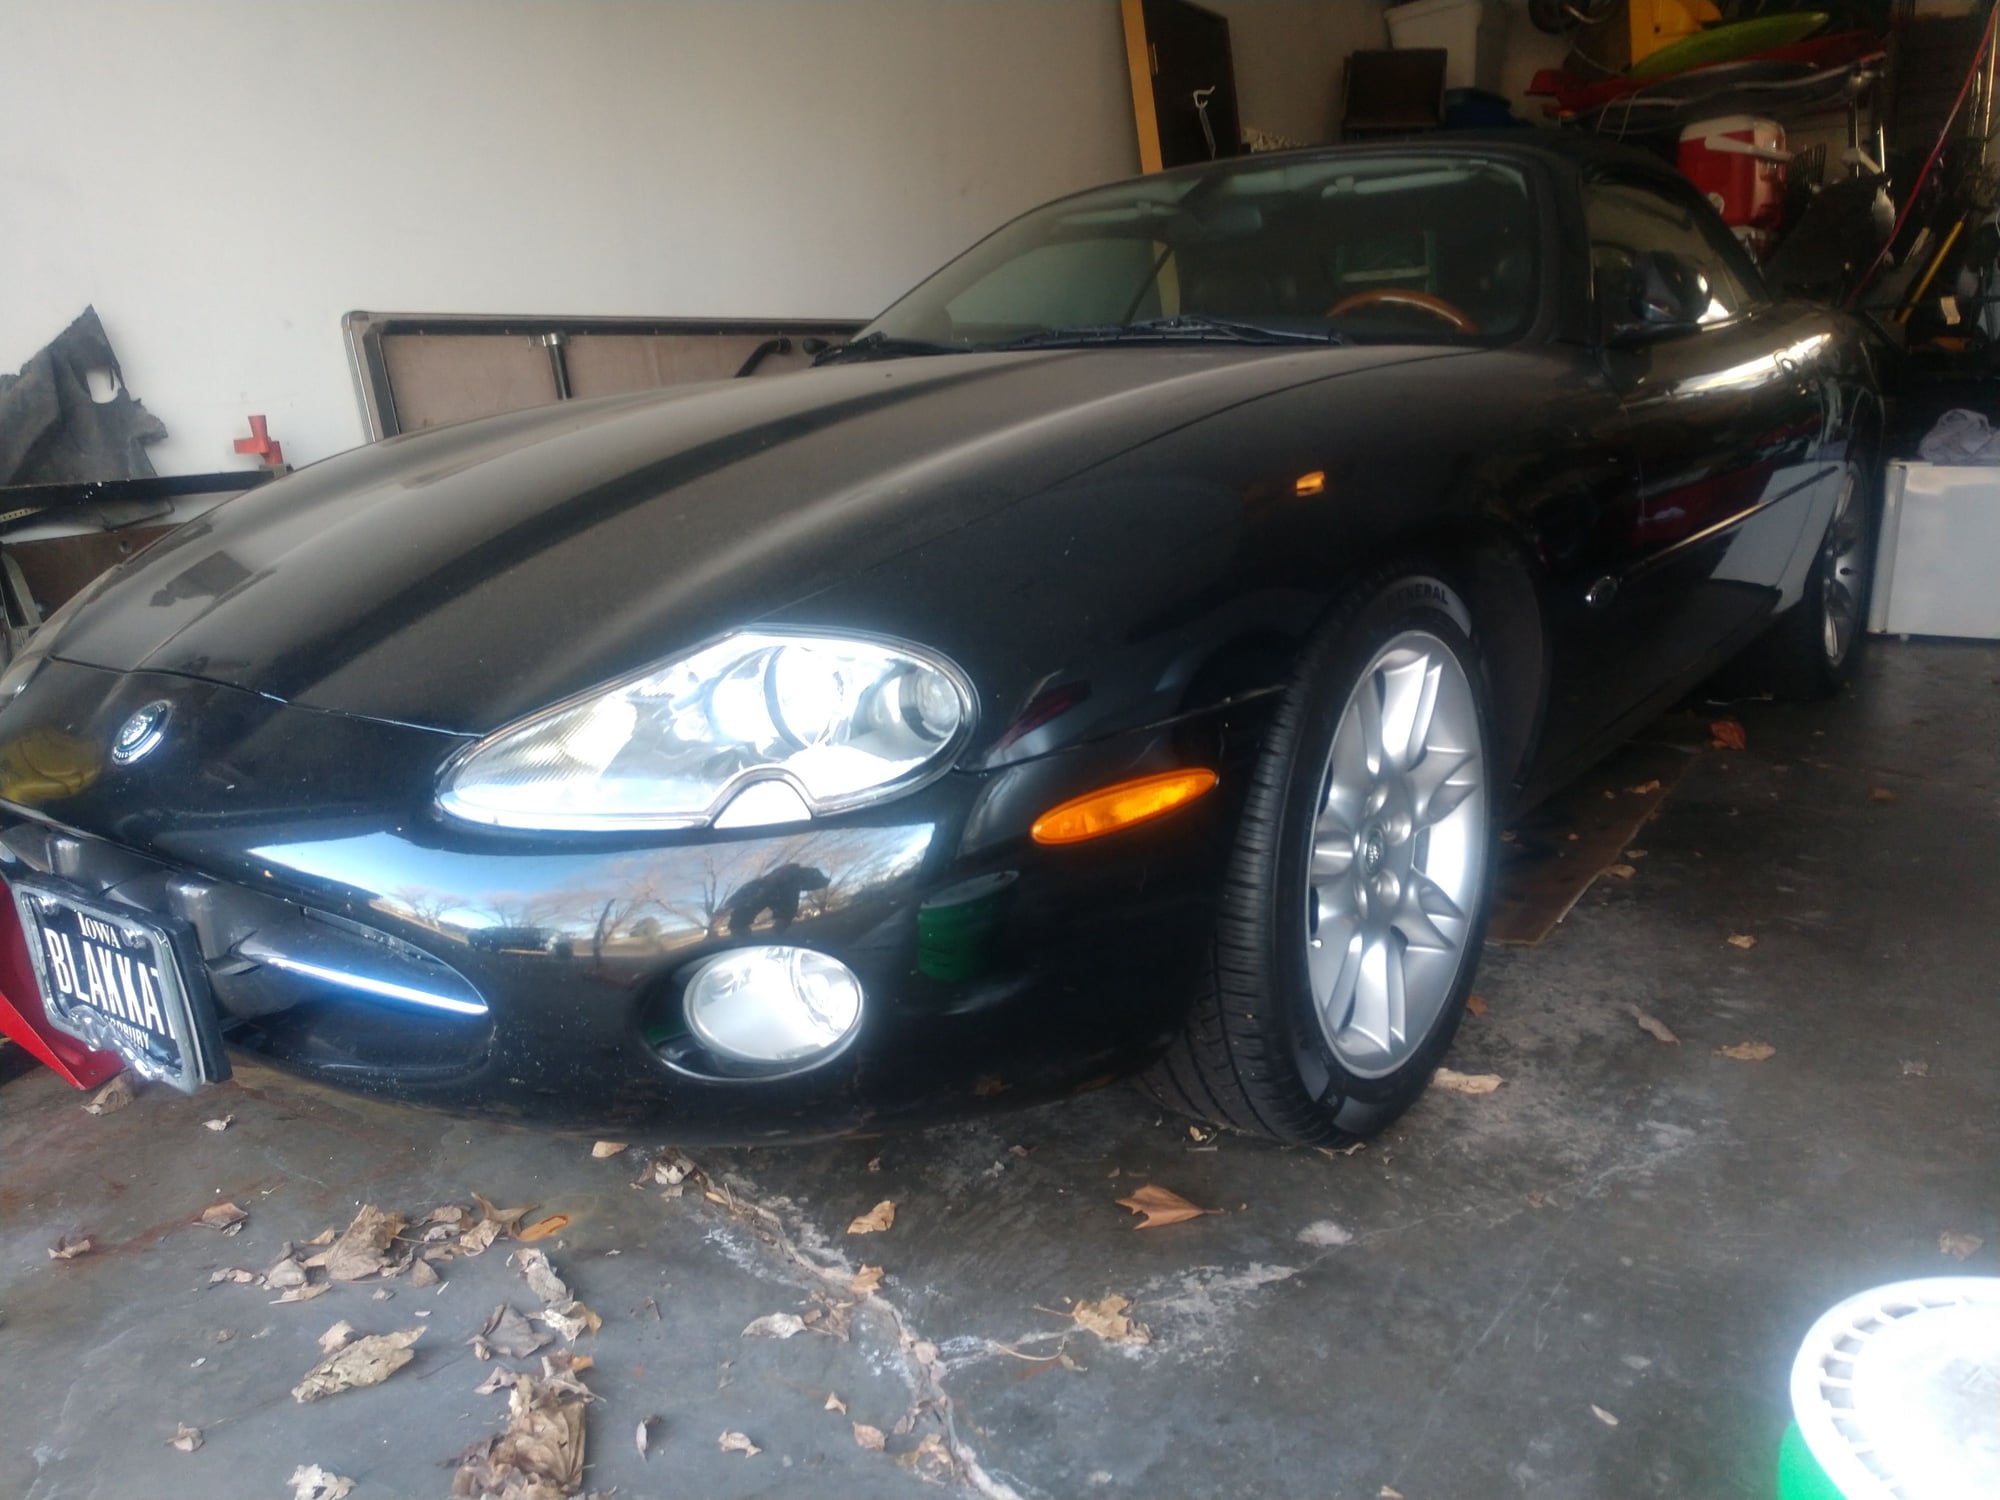 2002 Jaguar XK8 - Project Car - Used - VIN SAJDA42C92NA25731 - 127,000 Miles - 8 cyl - Convertible - Black - Sioux City, IA 51106, United States